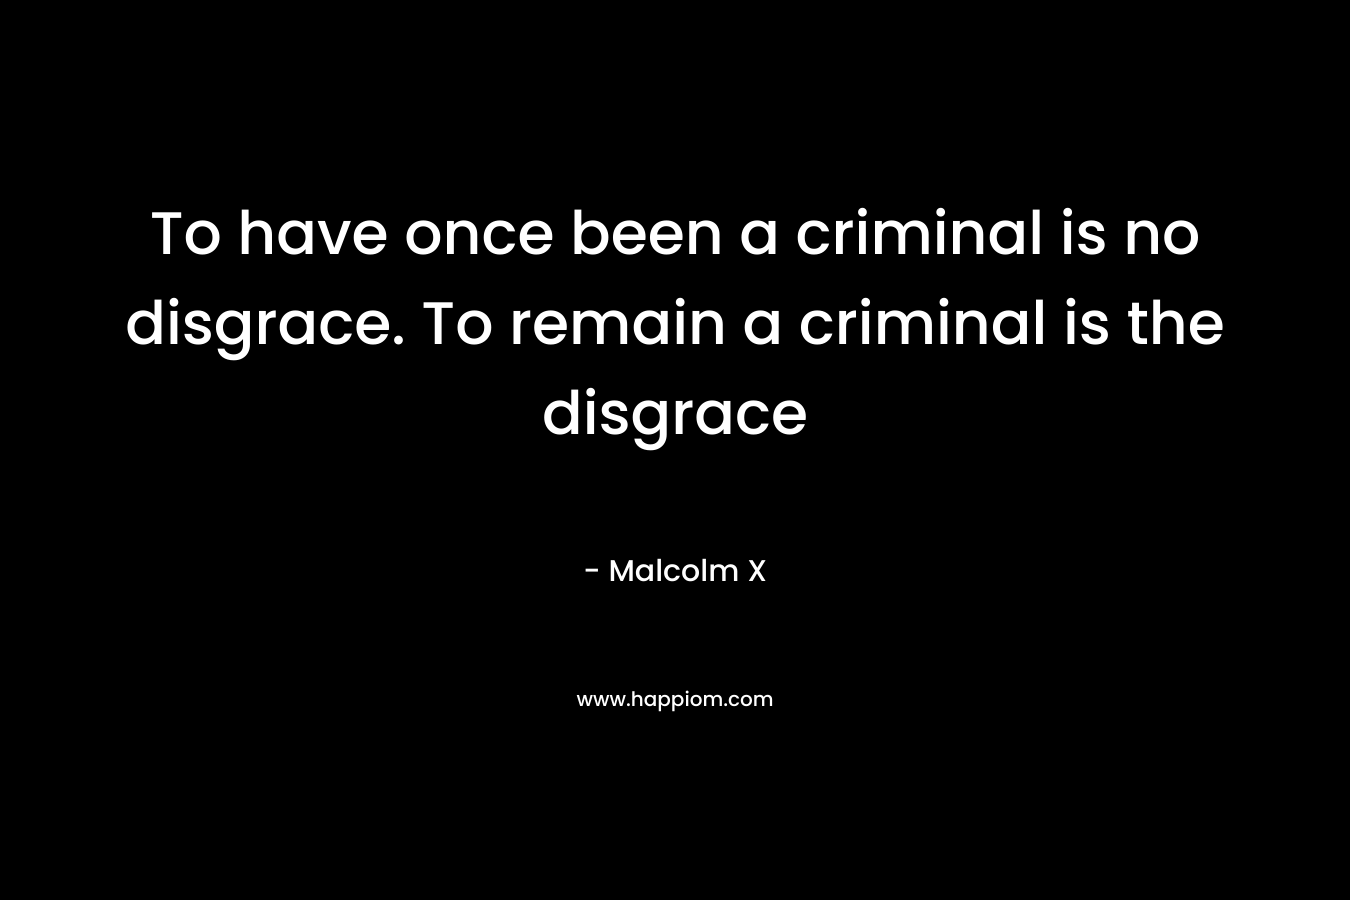 To have once been a criminal is no disgrace. To remain a criminal is the disgrace – Malcolm X